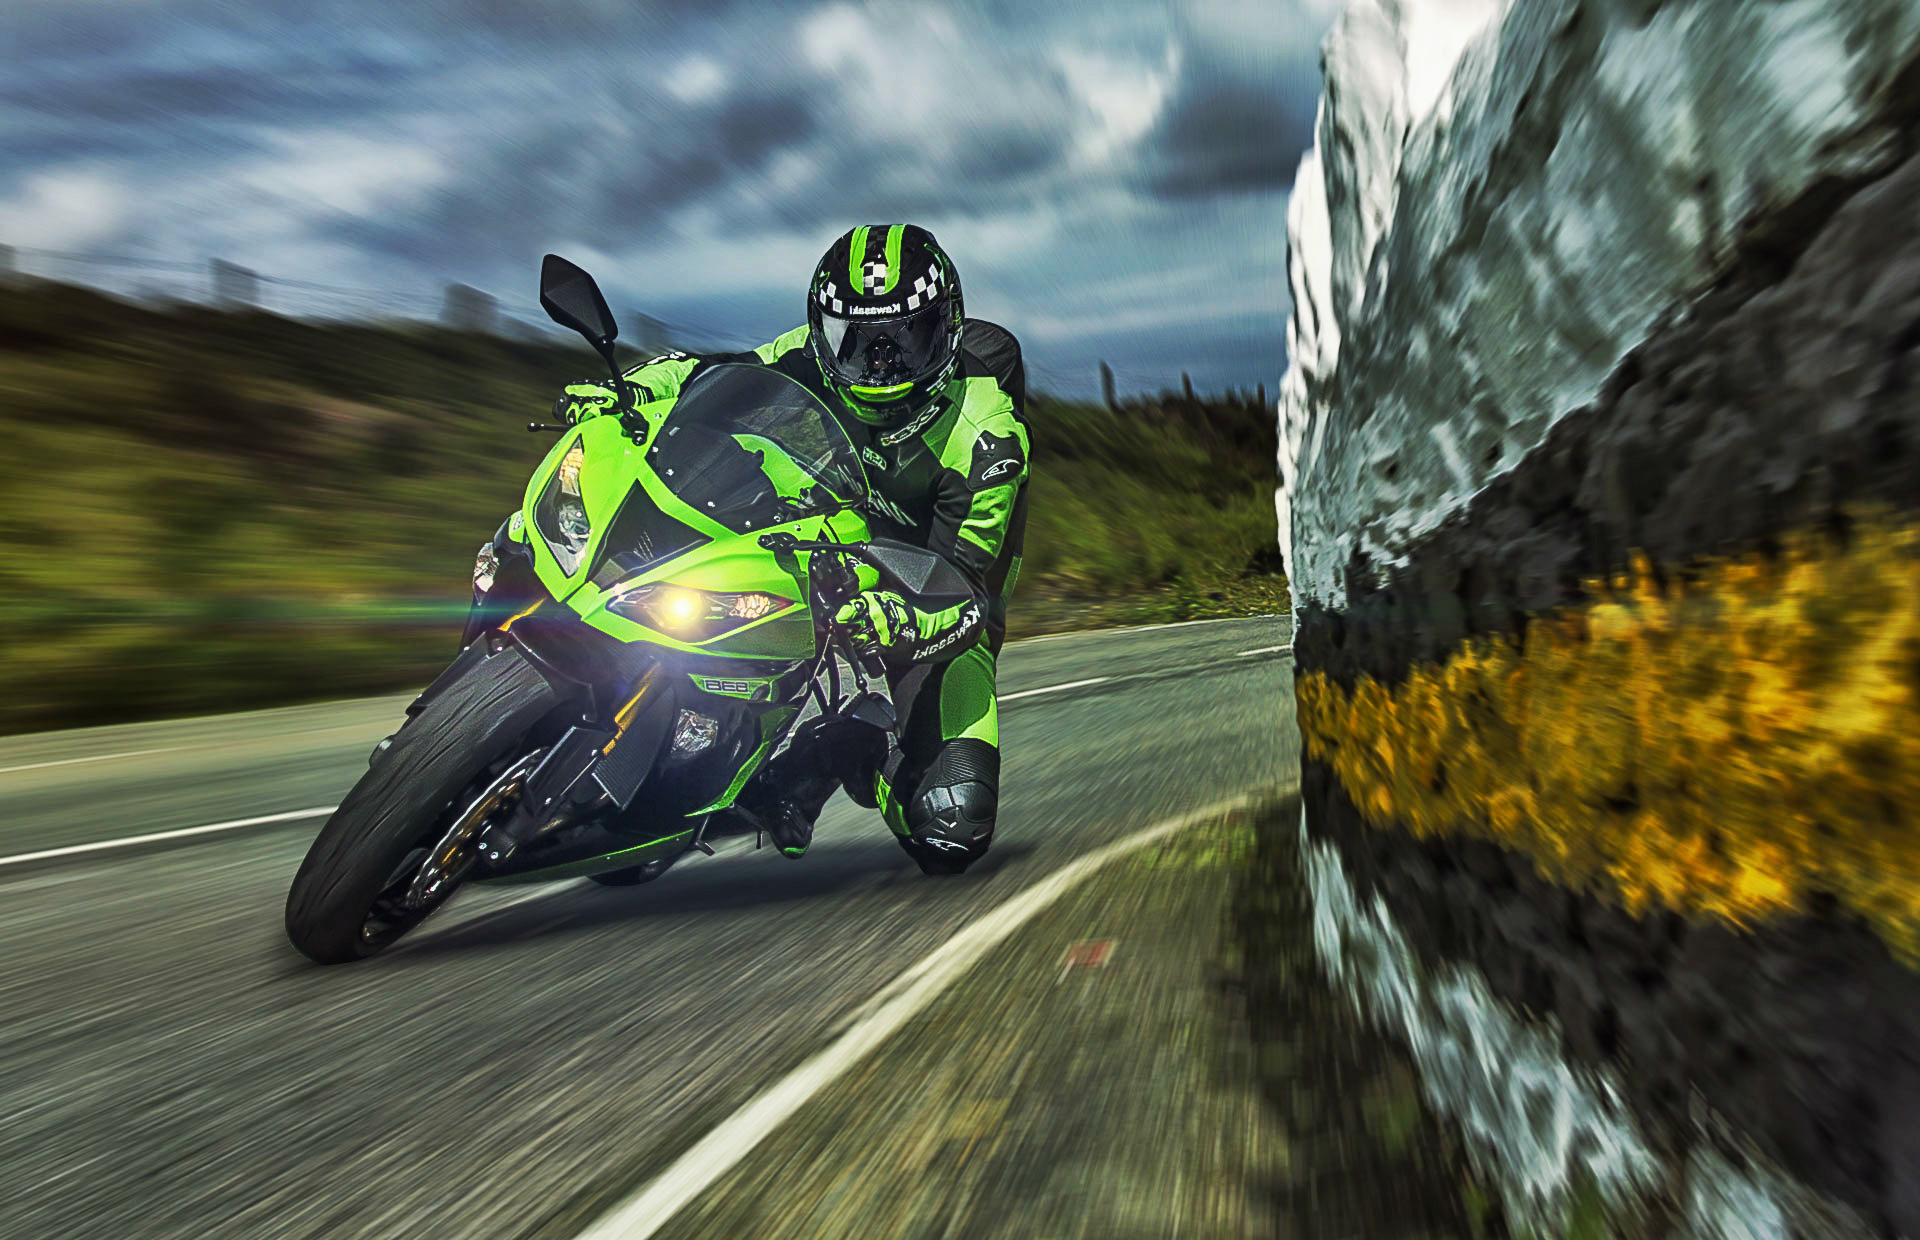 Top HDq Zx6r Image